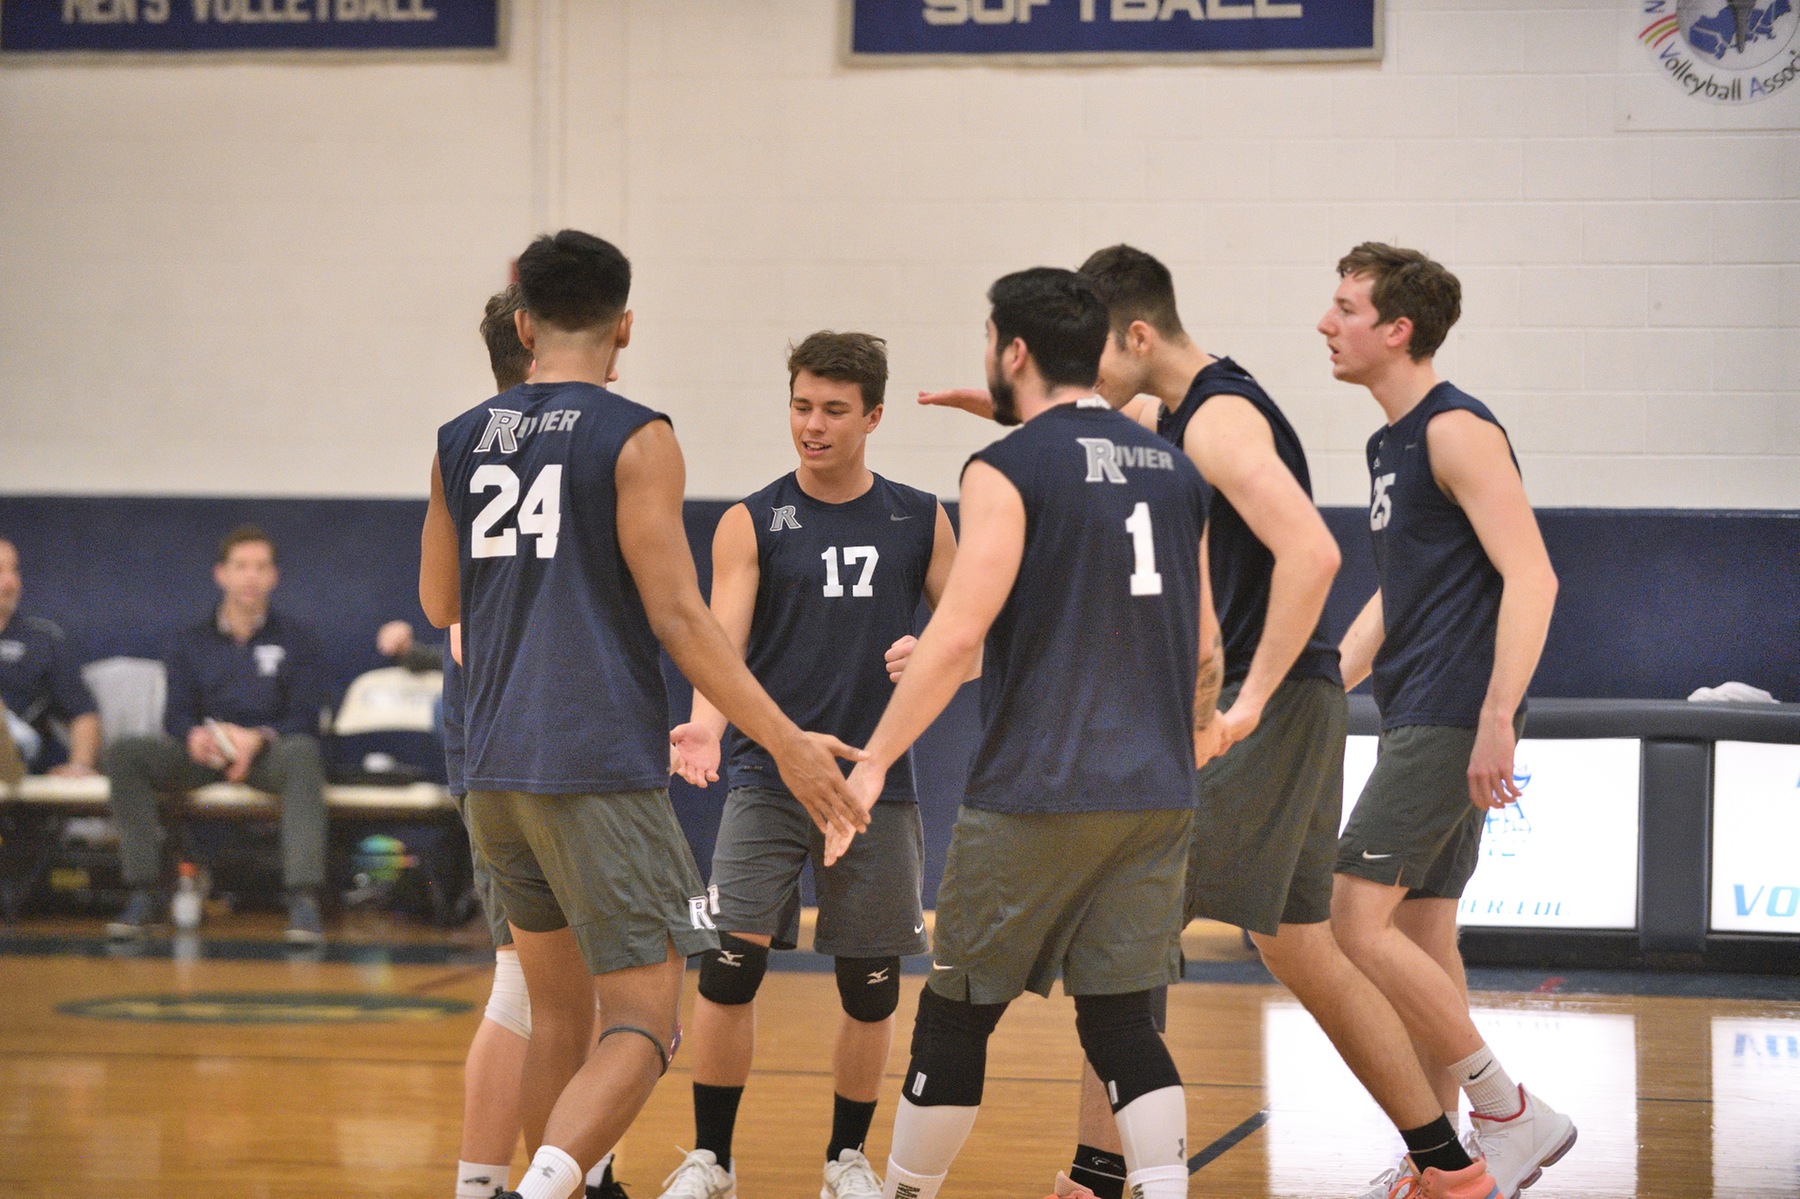 Men's Volleyball: The Raiders remain perfect in GNAC with win over Wildcats